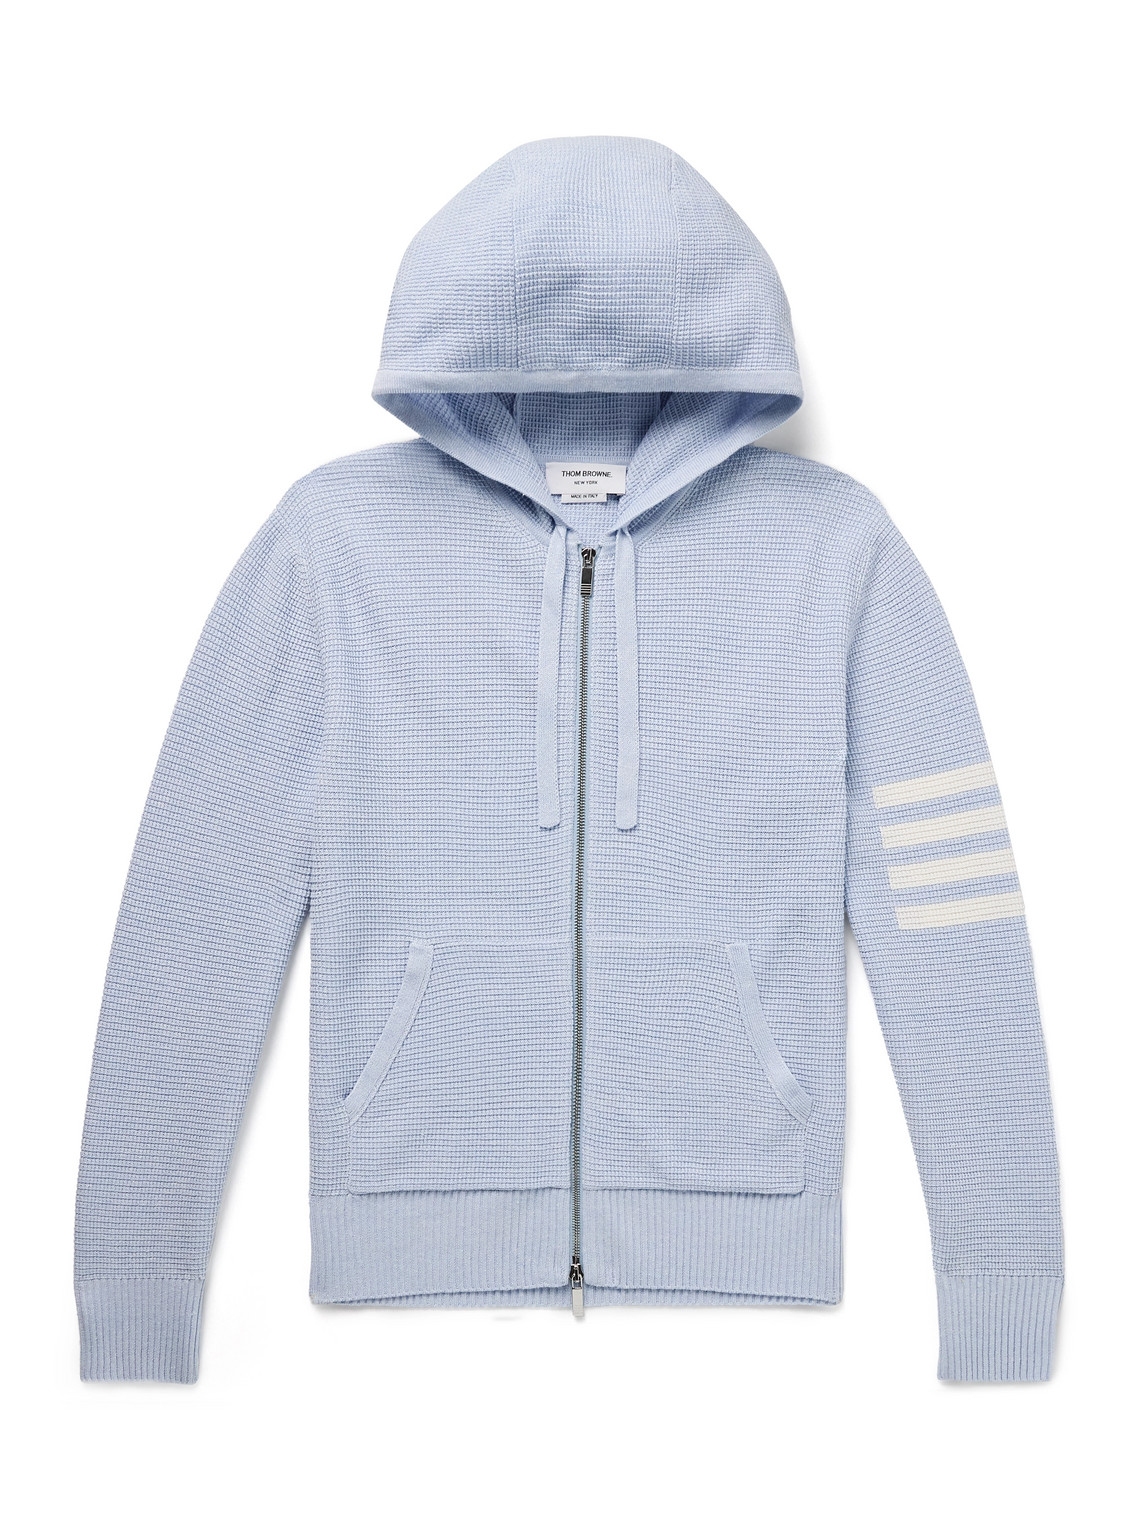 Thom Browne Intarsia-knit Striped Textured Linen And Cotton-blend Zip-up Hoodie In Blue